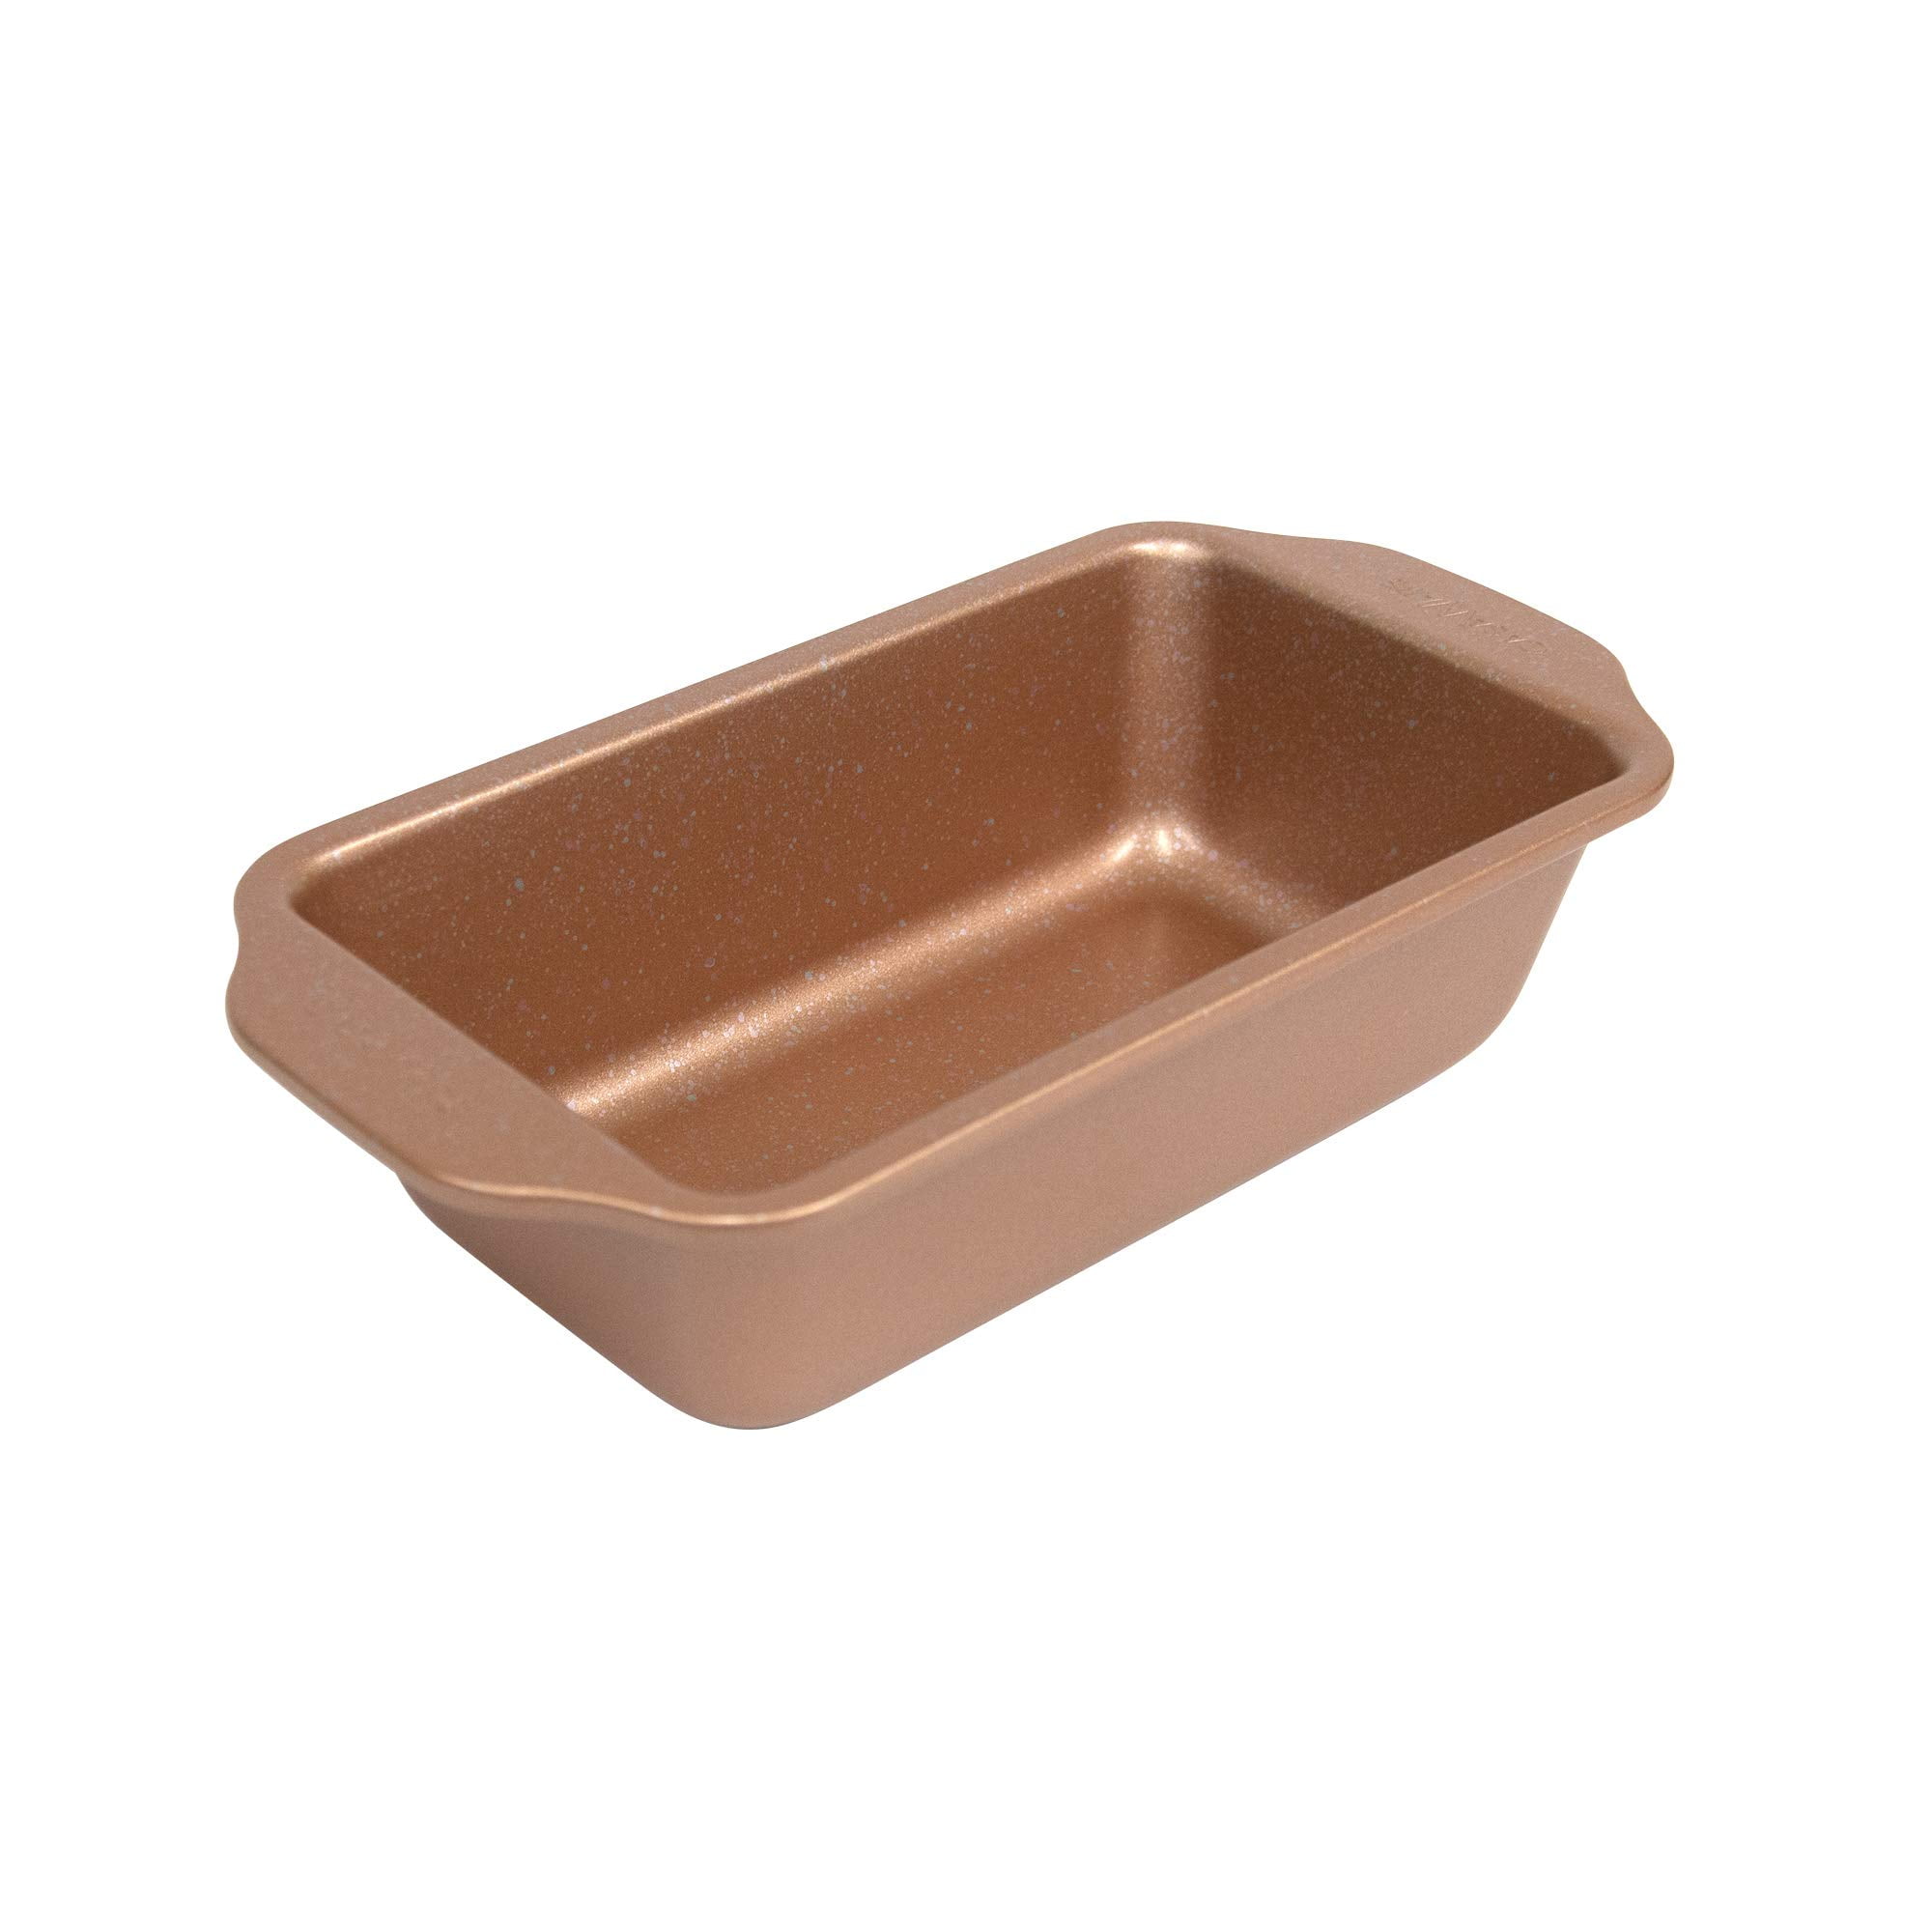 Save on Smart Living Loaf Pan Large Non-Stick 9 X 5 Inch Order